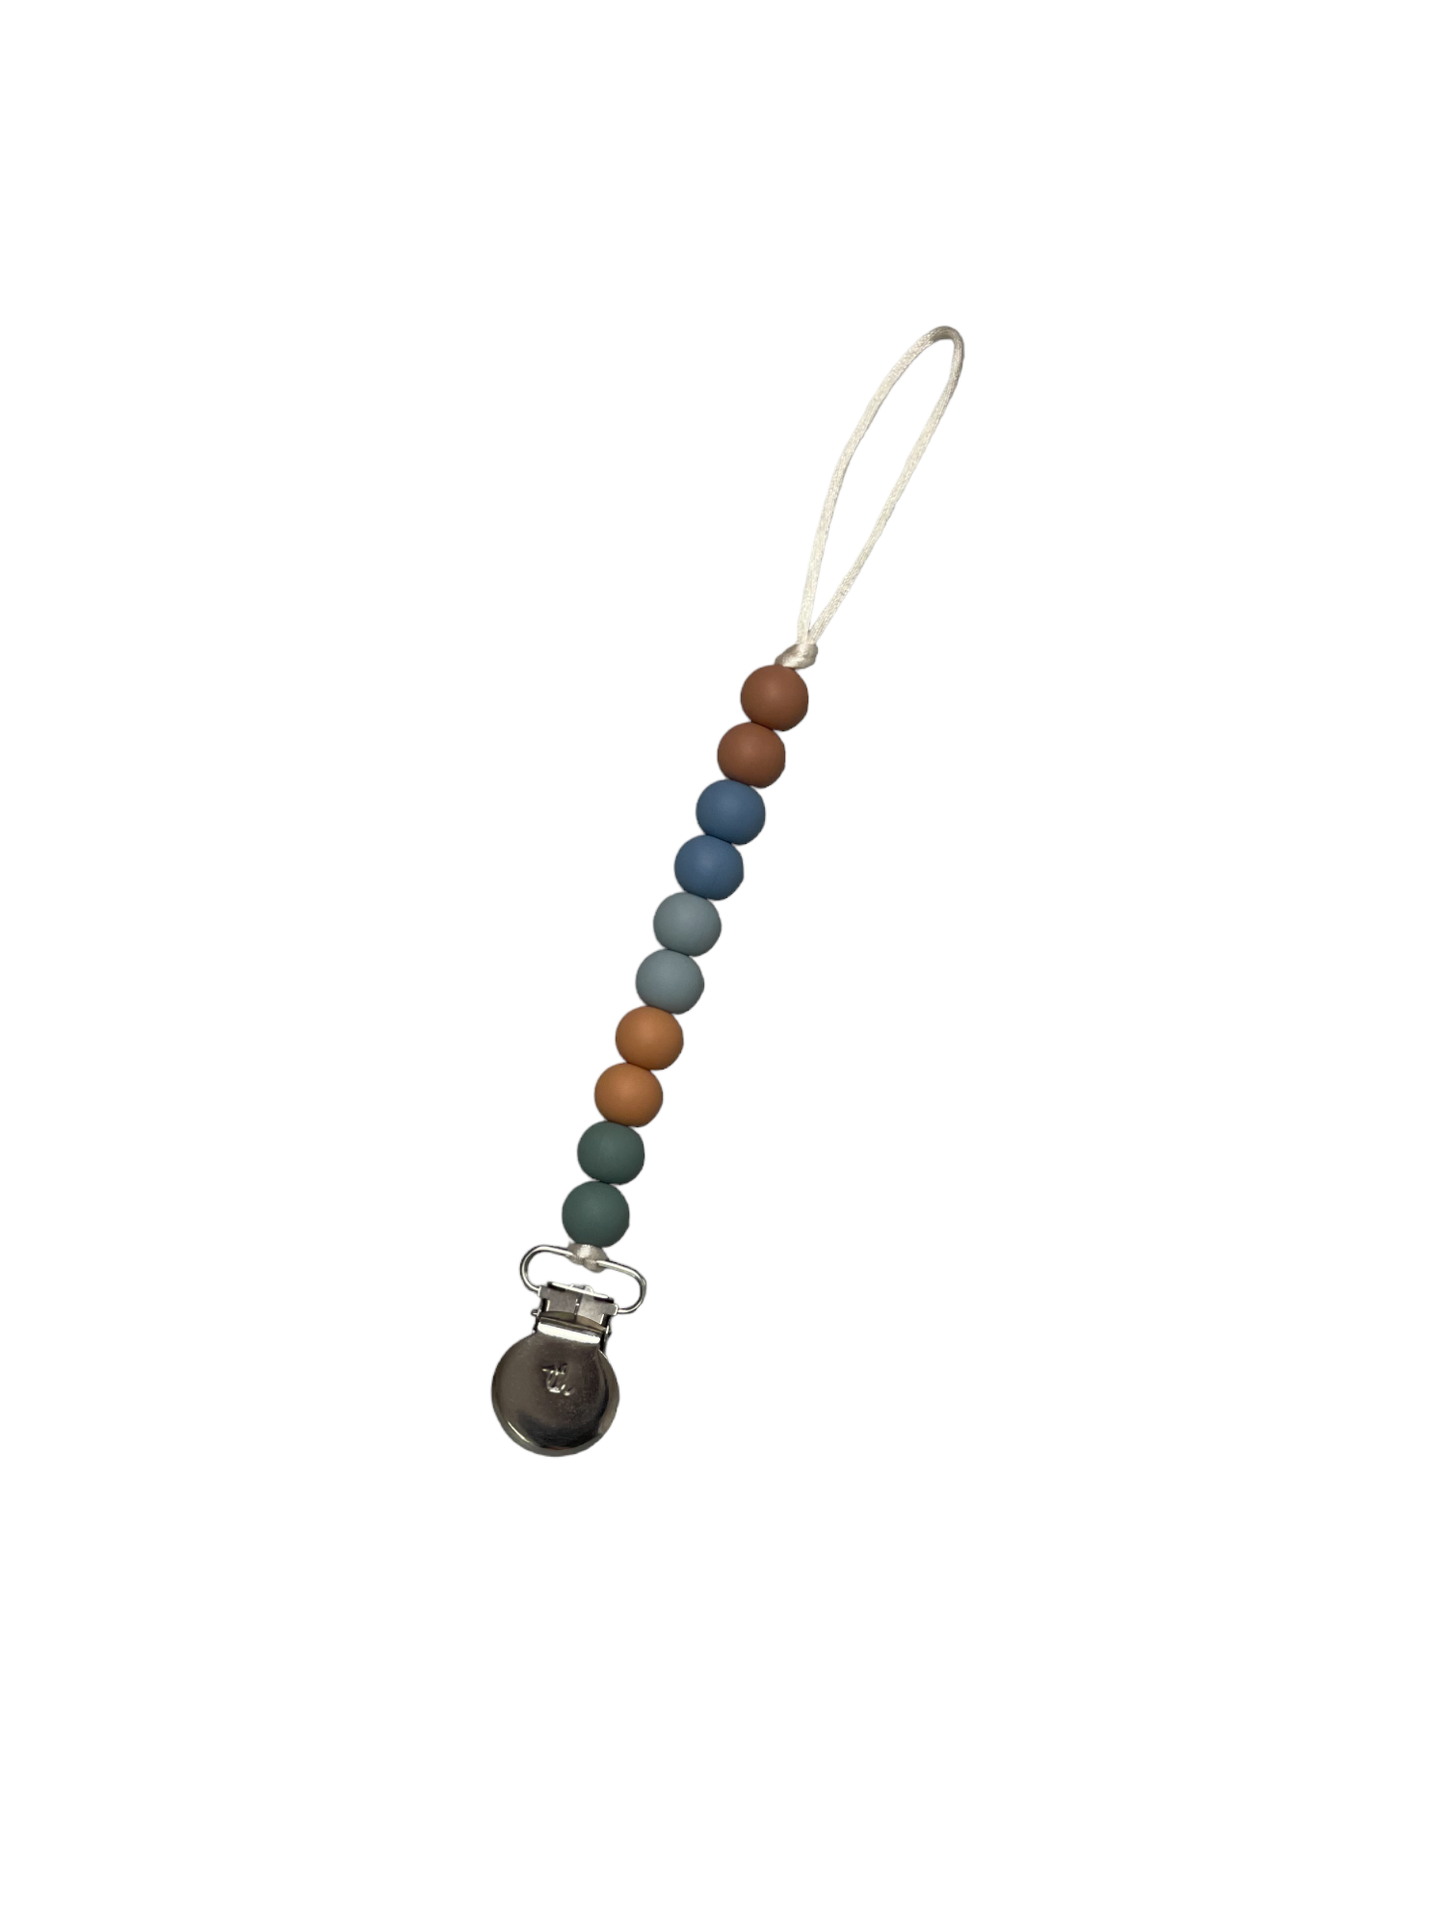 Molly Petite Pacifier/Toy Clip- Storm Clouds